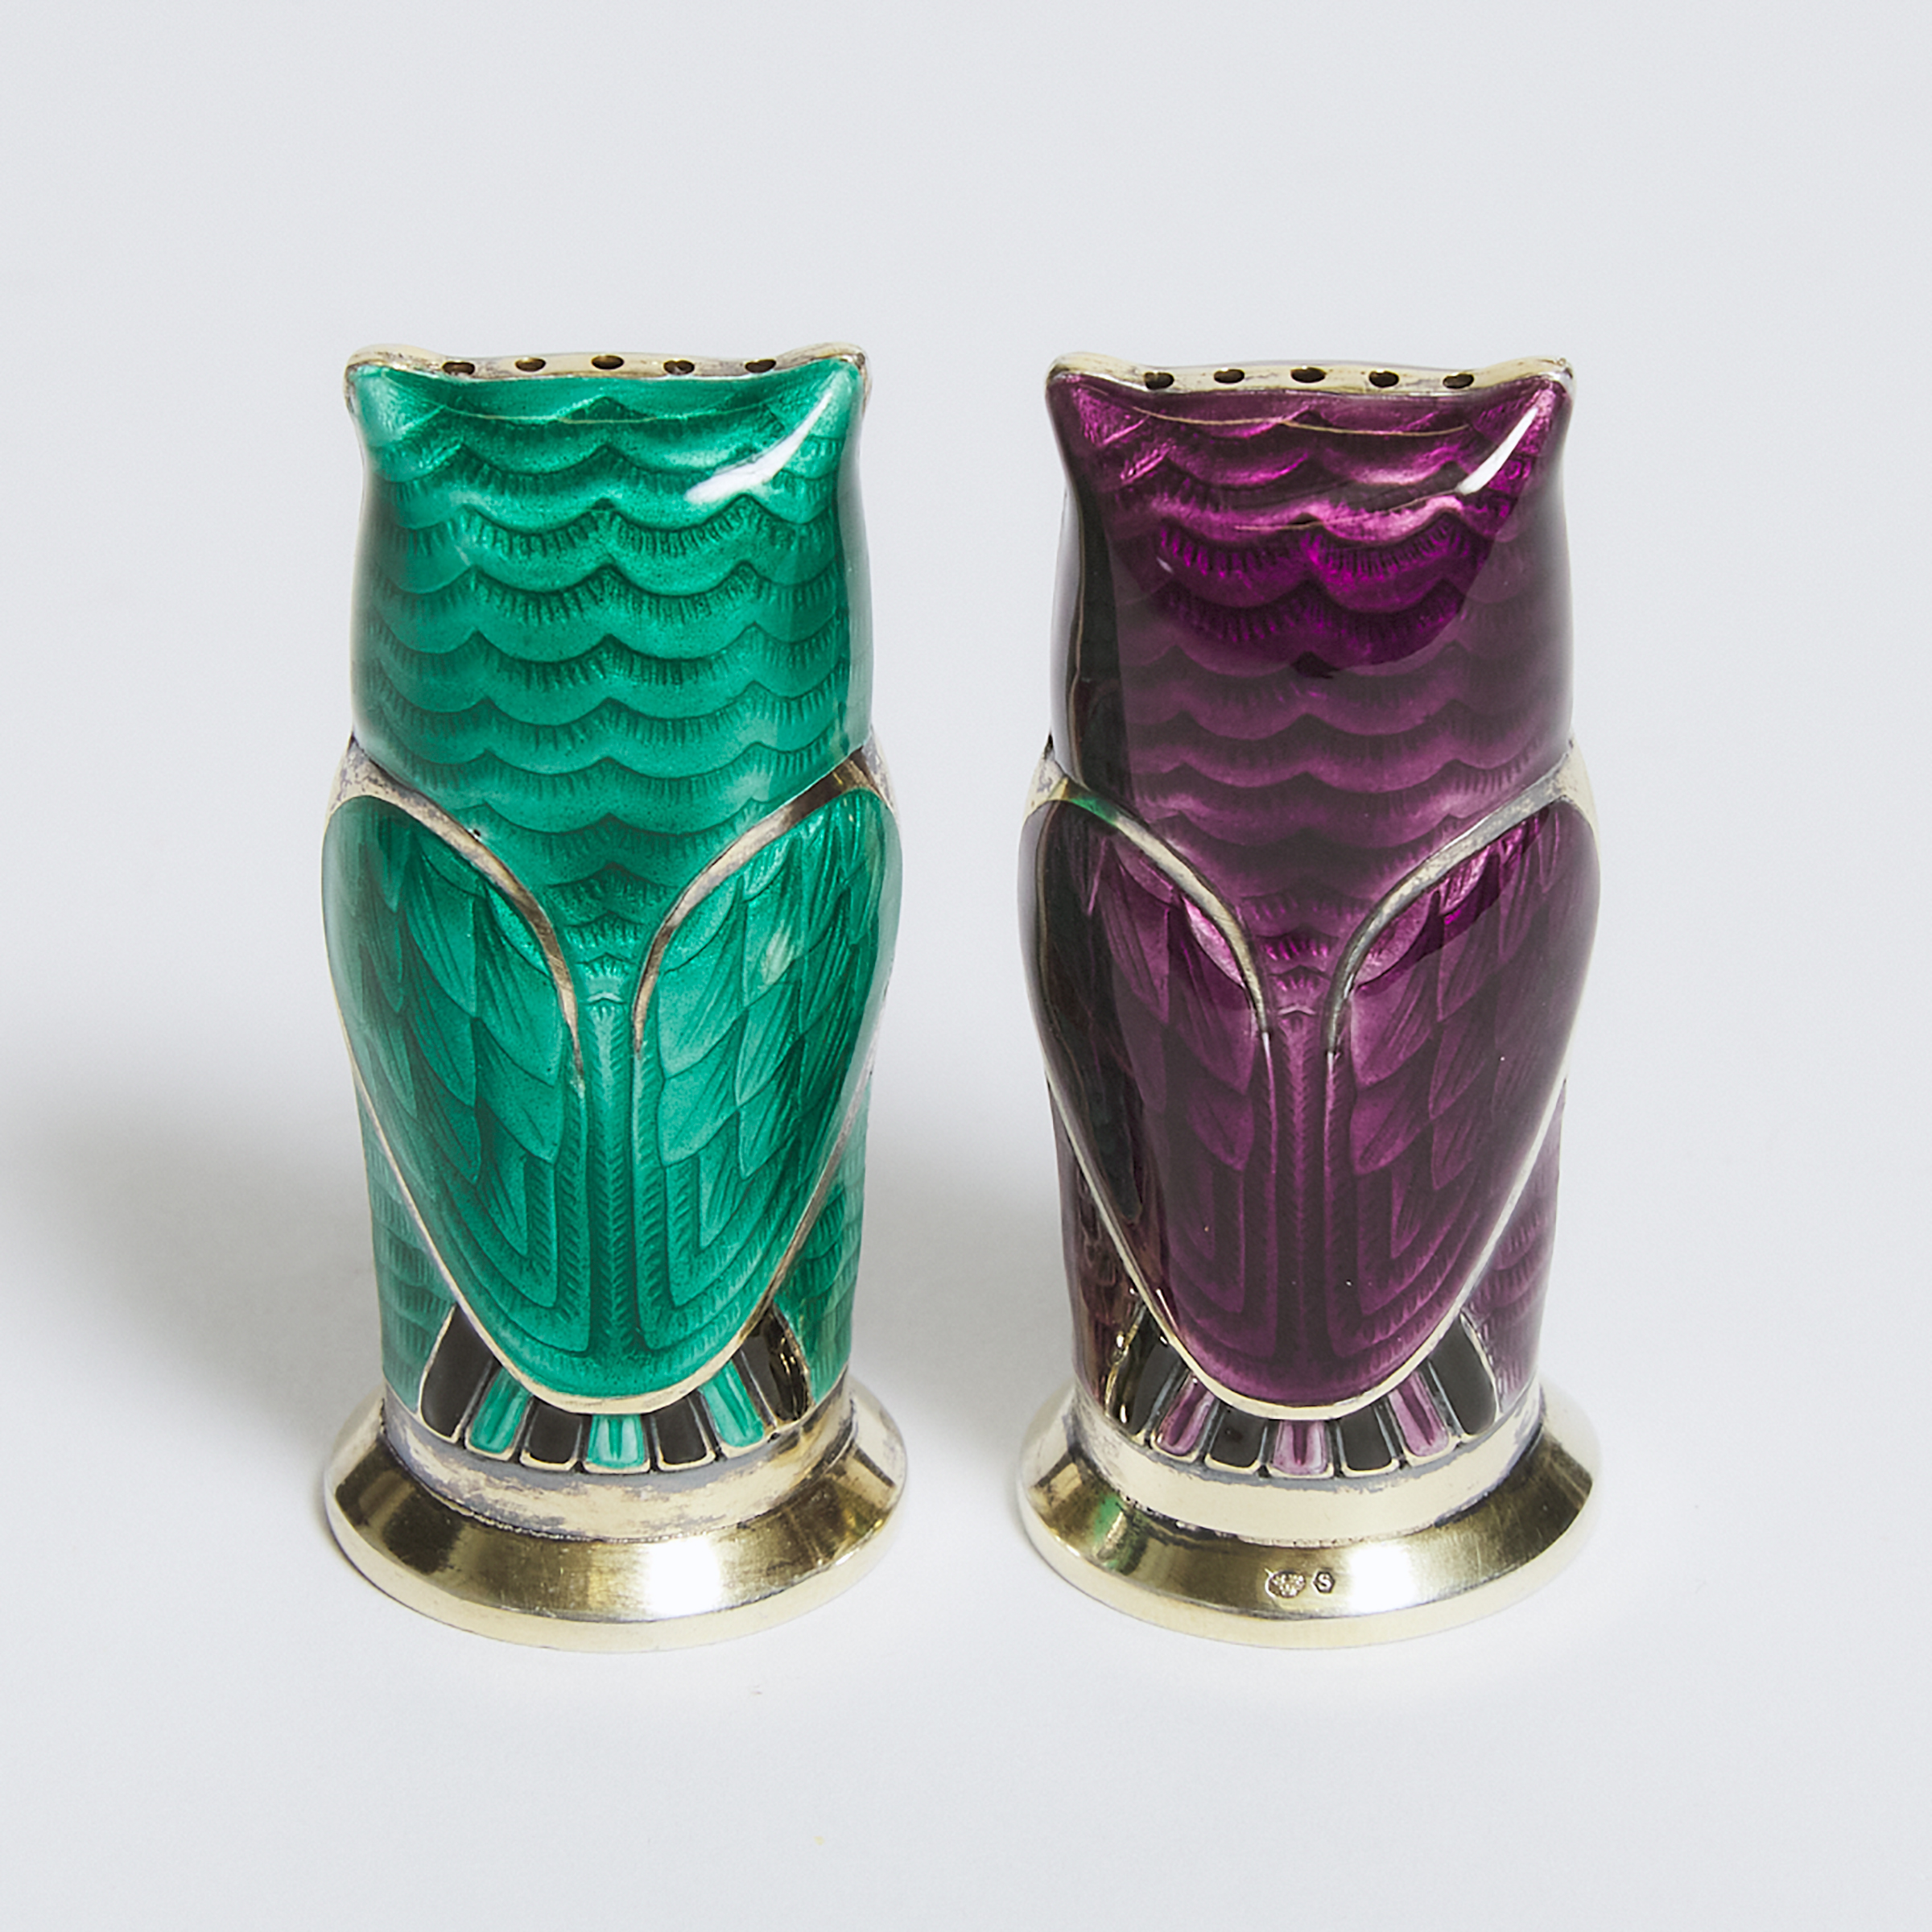 Pair of Norwegian Enameled Silver Owl-Form Salt and Pepper Casters, David Andersen, Oslo, 20th century